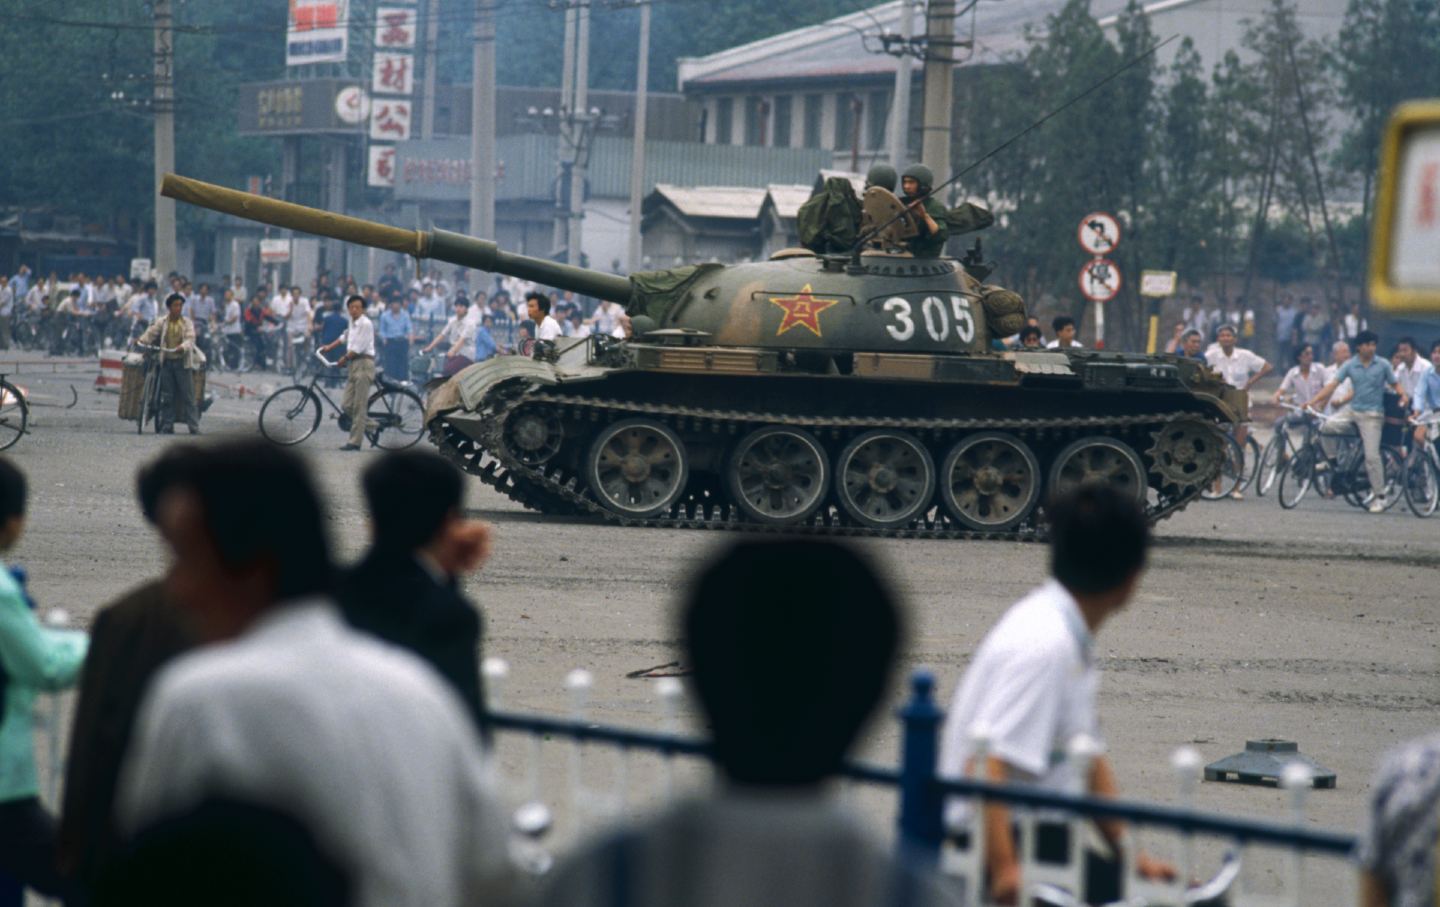 Tiananmen Square aftermath